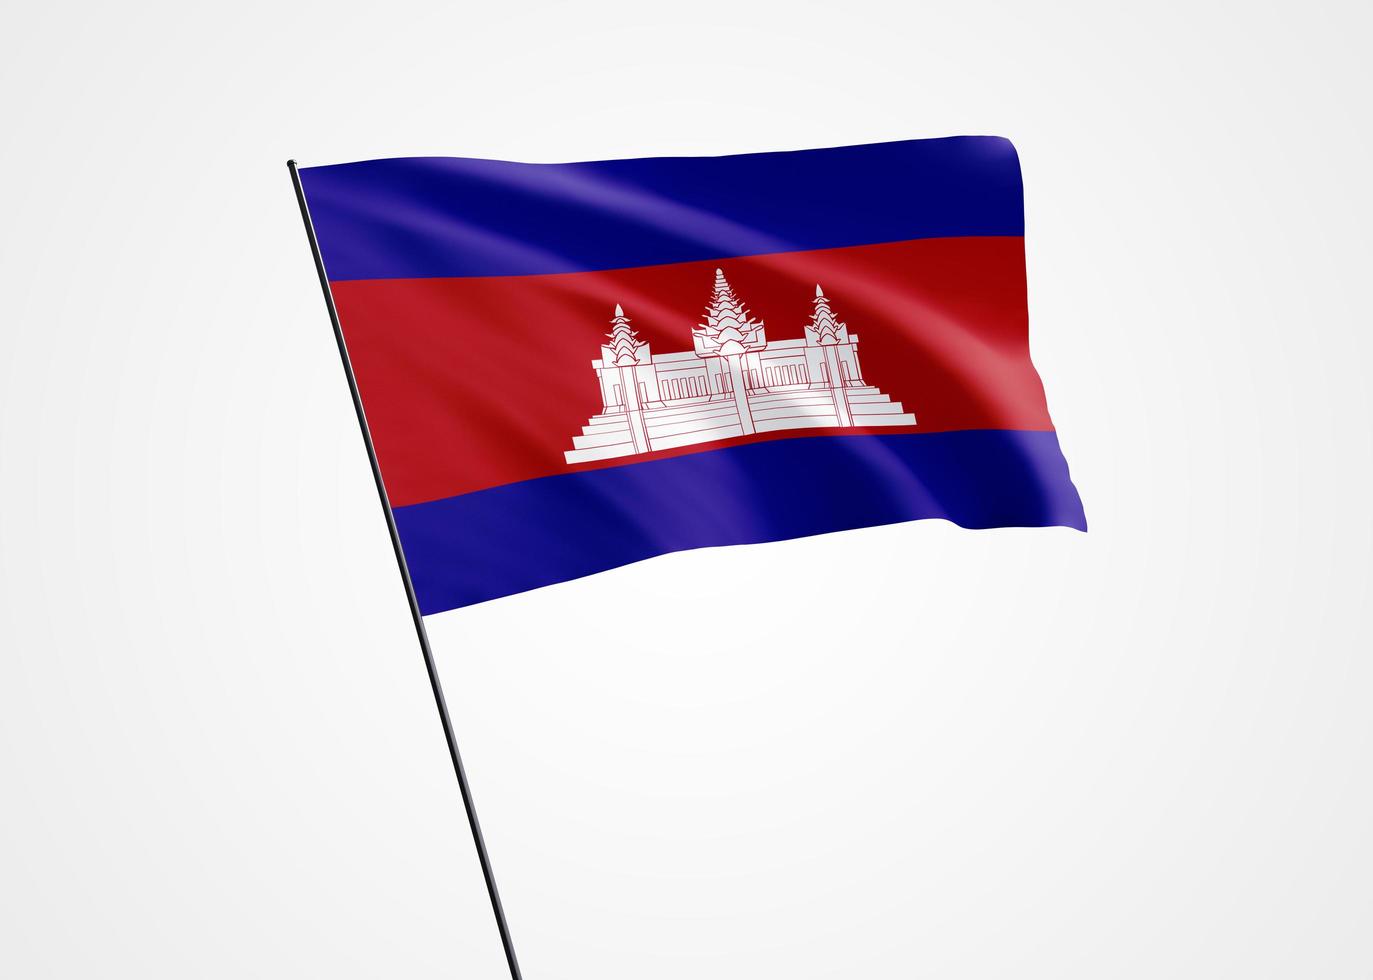 Cambodia flag flying high in the isolated background. November 9 Cambodia independence day. World national flag collection world national flag collection photo